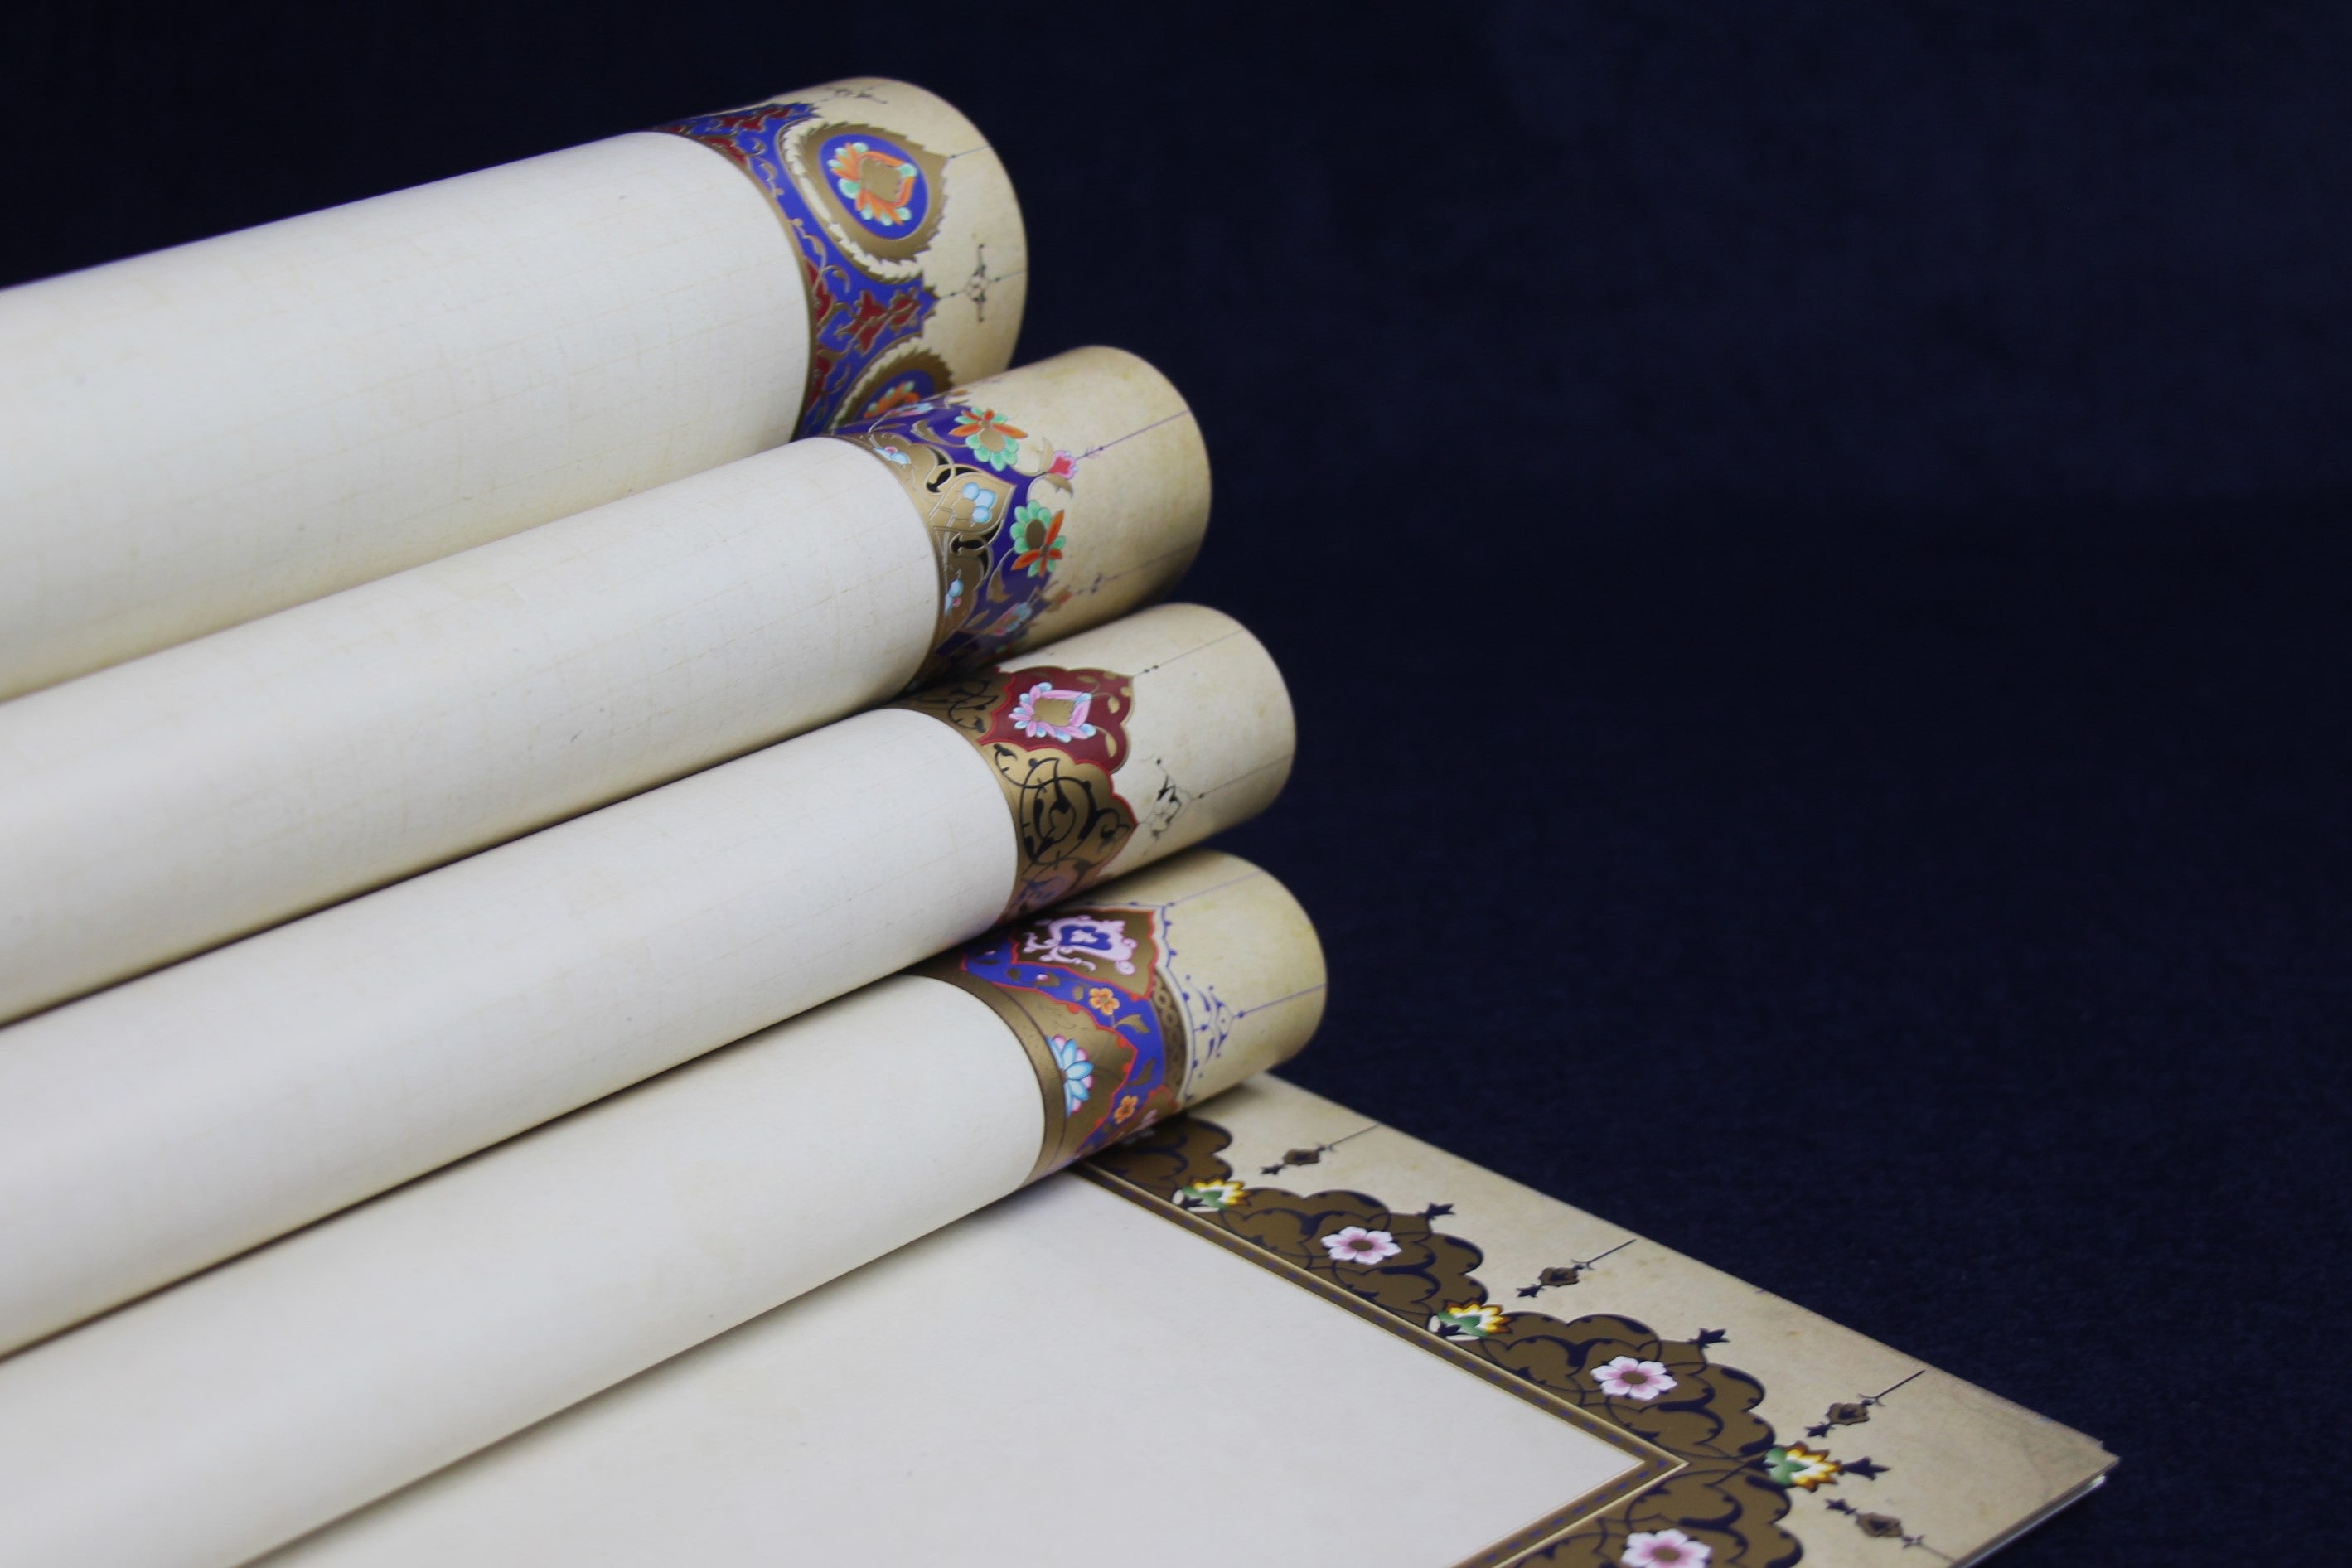 Book of 25 leaves of semi-gloss paper for Arabic calligraphy with decorated border (d)